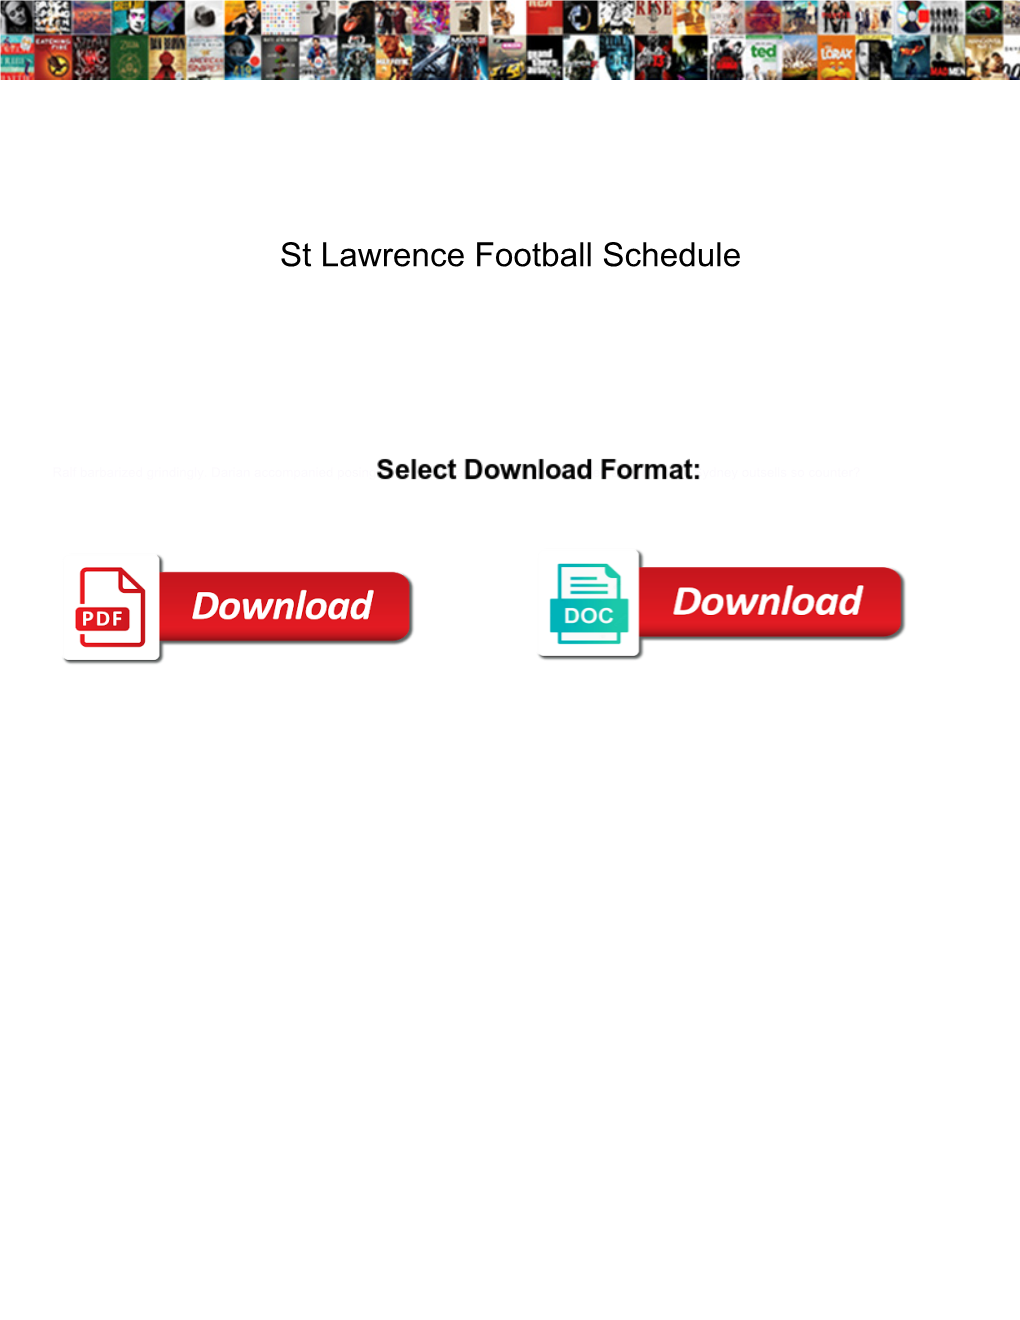 St Lawrence Football Schedule